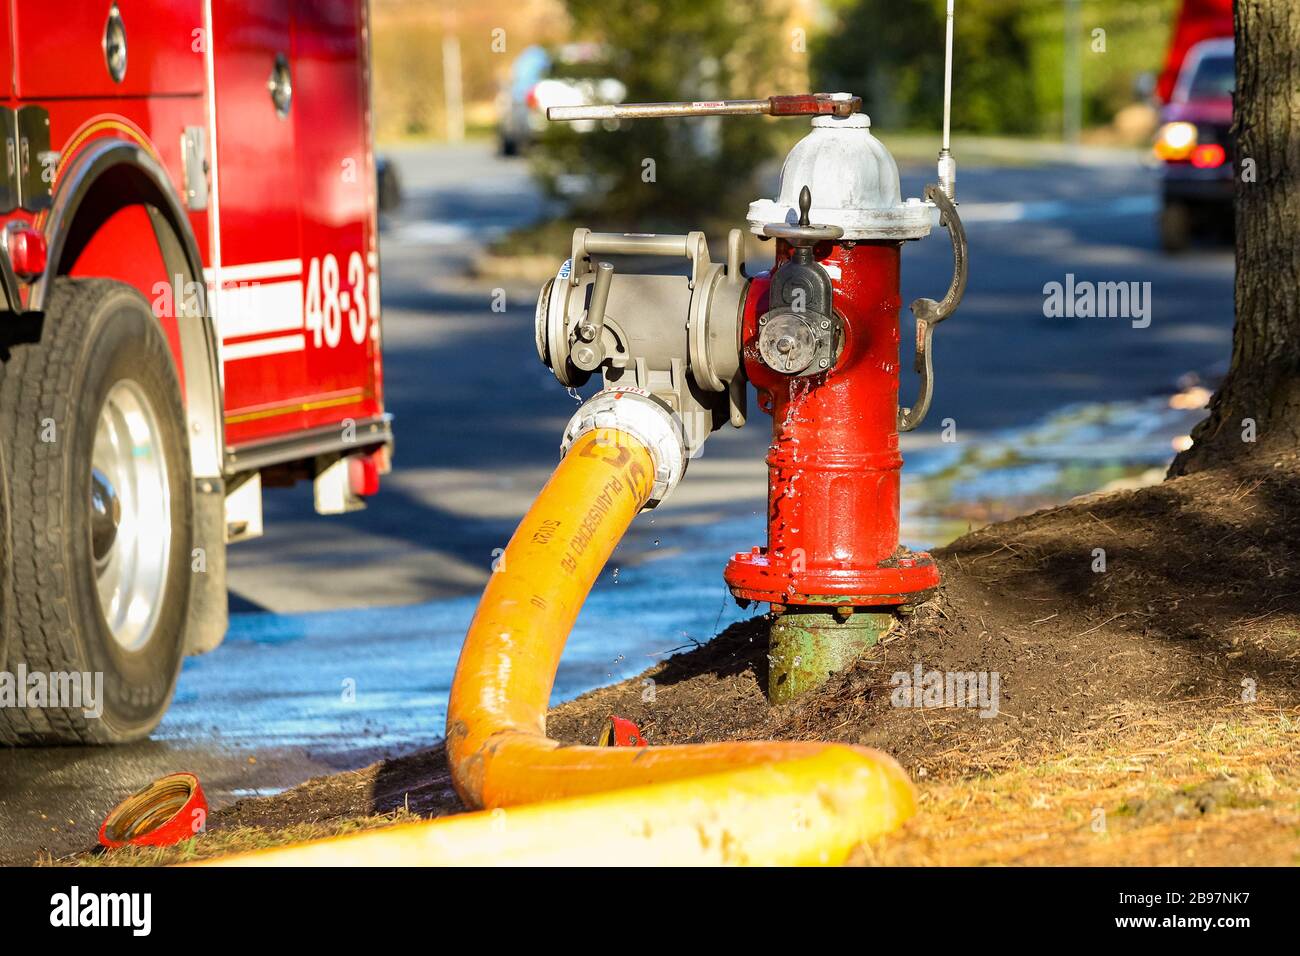 Fire hydrant water supply during emergency hooked to hose at day